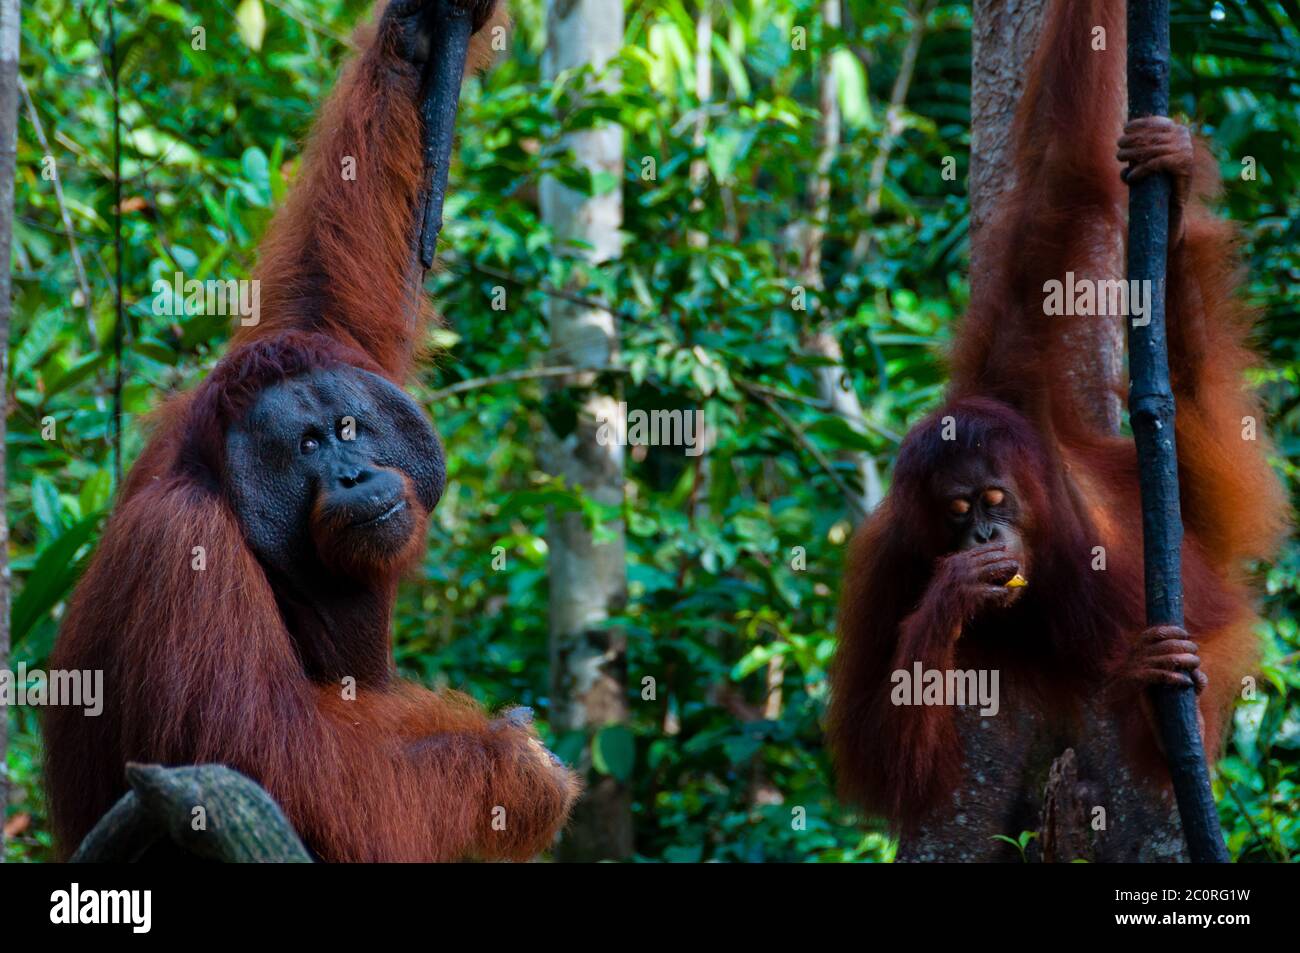 two Orangutan hanging on a tree in the jungle, Indonesia Stock Photo